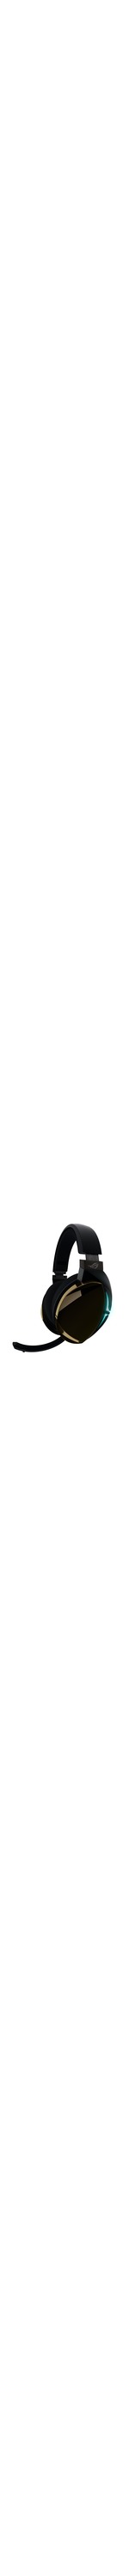 Asus ROG Strix Fusion 500 Wired Over-the-head Stereo Gaming Headset - Black